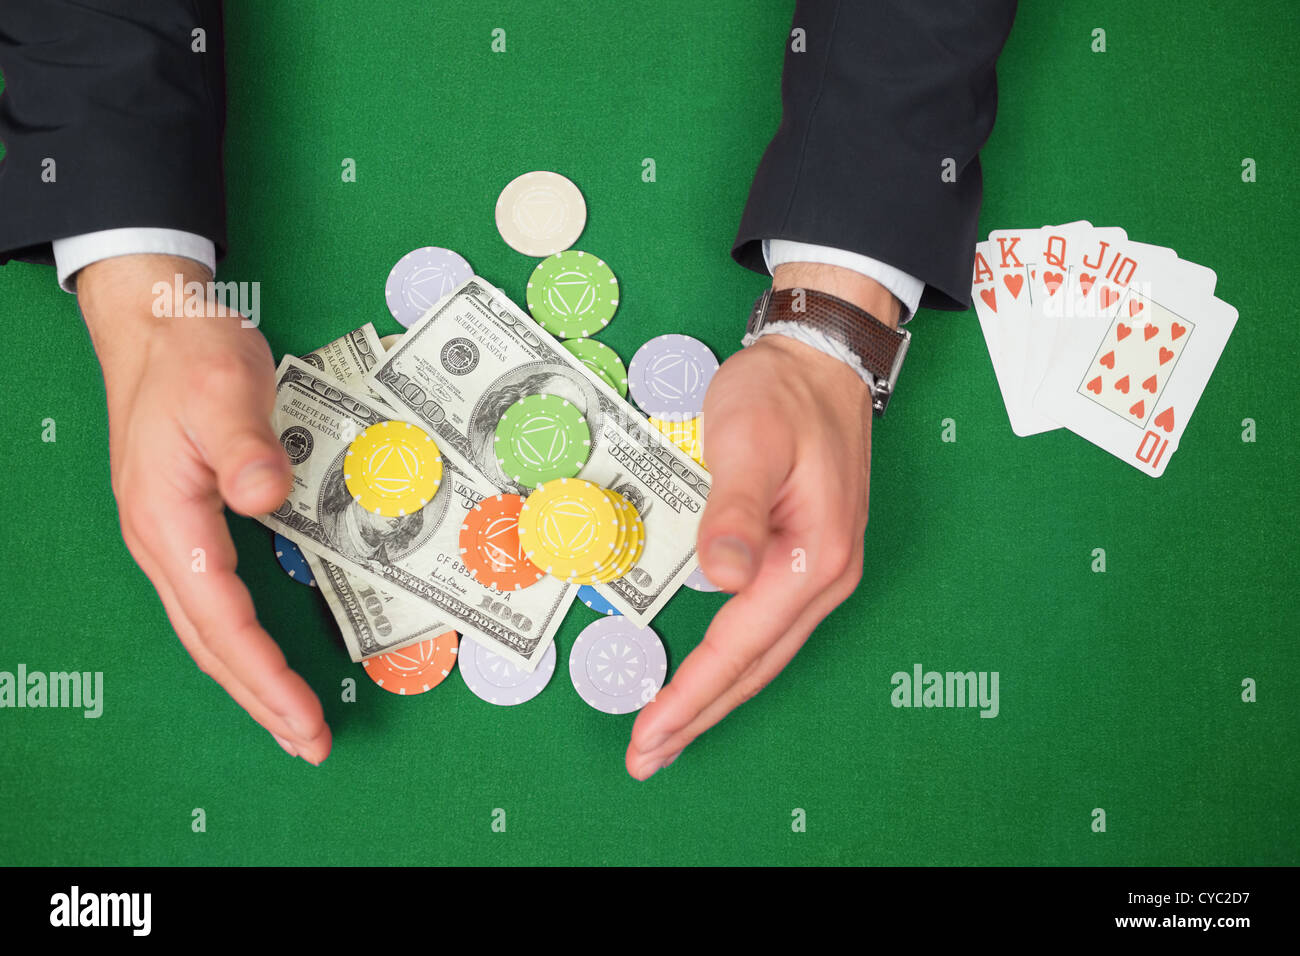 Hands grabbing dollars and chips from table beside royal flush Stock Photo